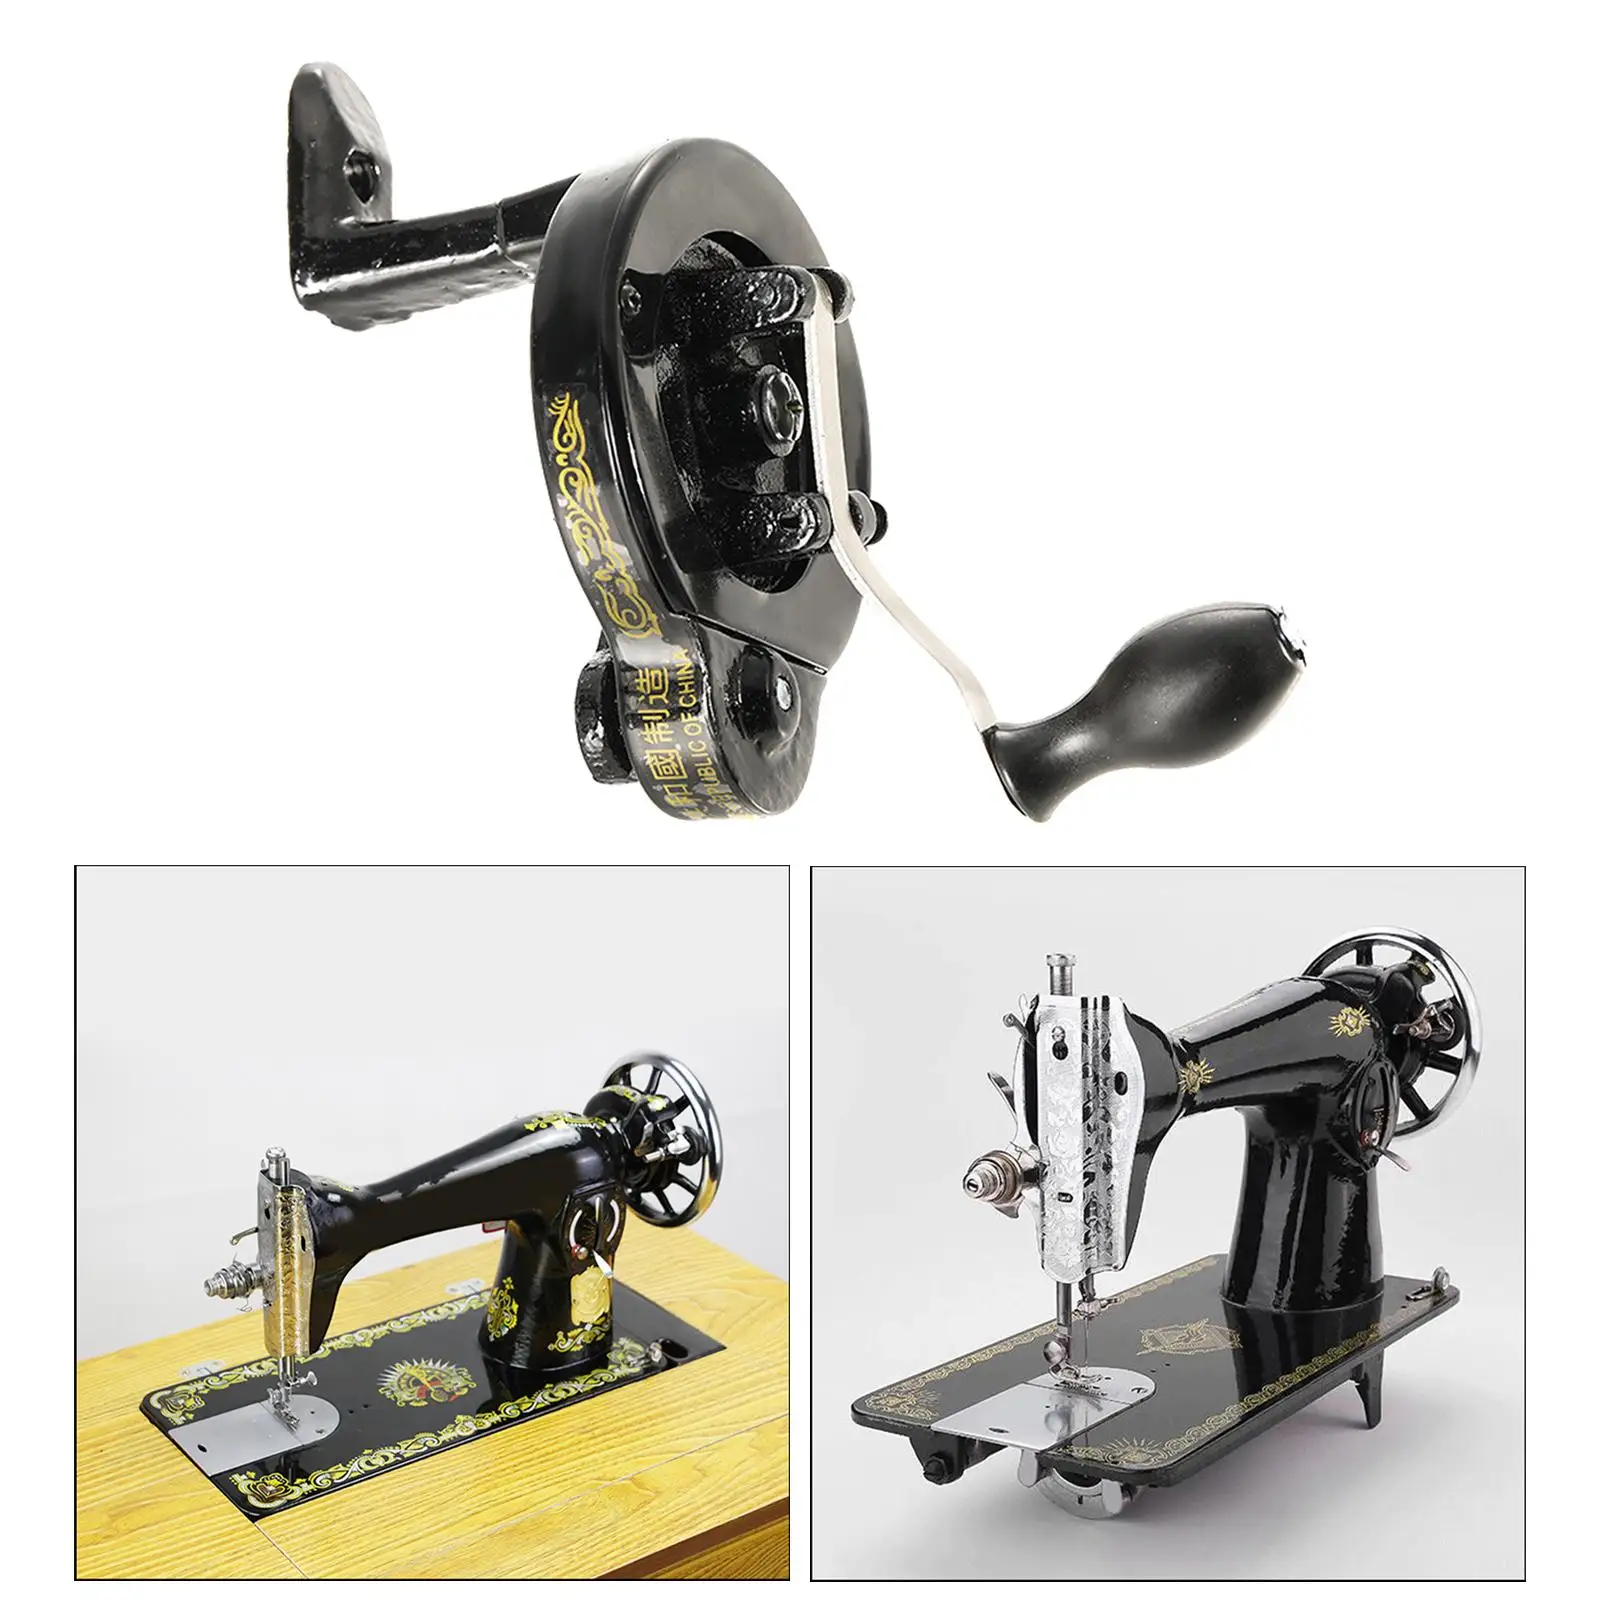 tishita Sewing Machine Hand Crank Handle Handcrank Replace for Old Sewing